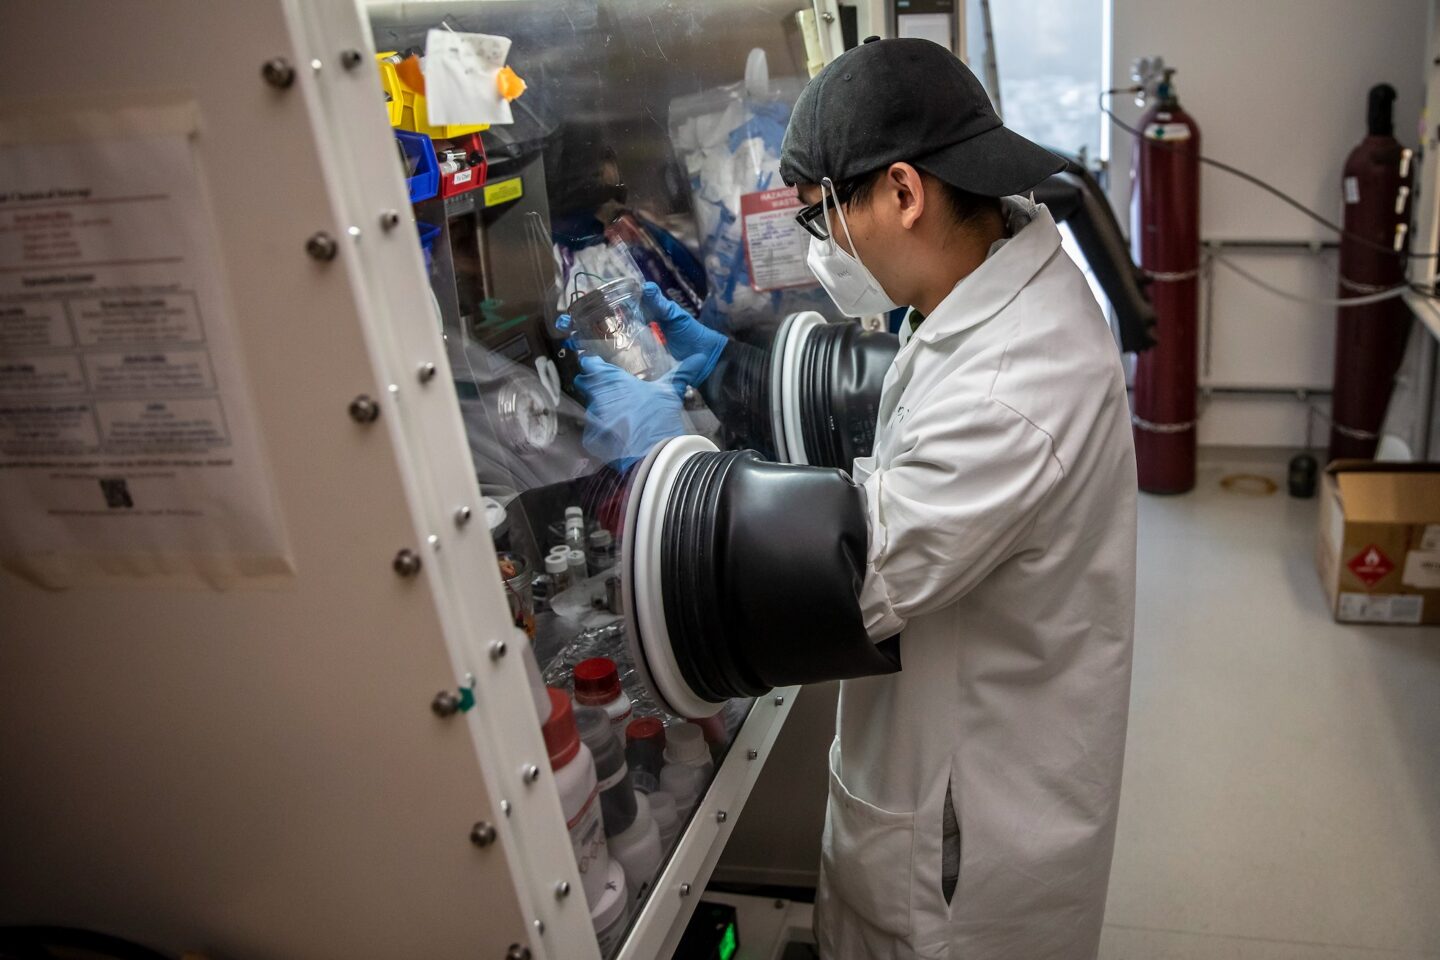 Scientist in a white coat and black backwards baseball cap handles a sample in a fume hood.